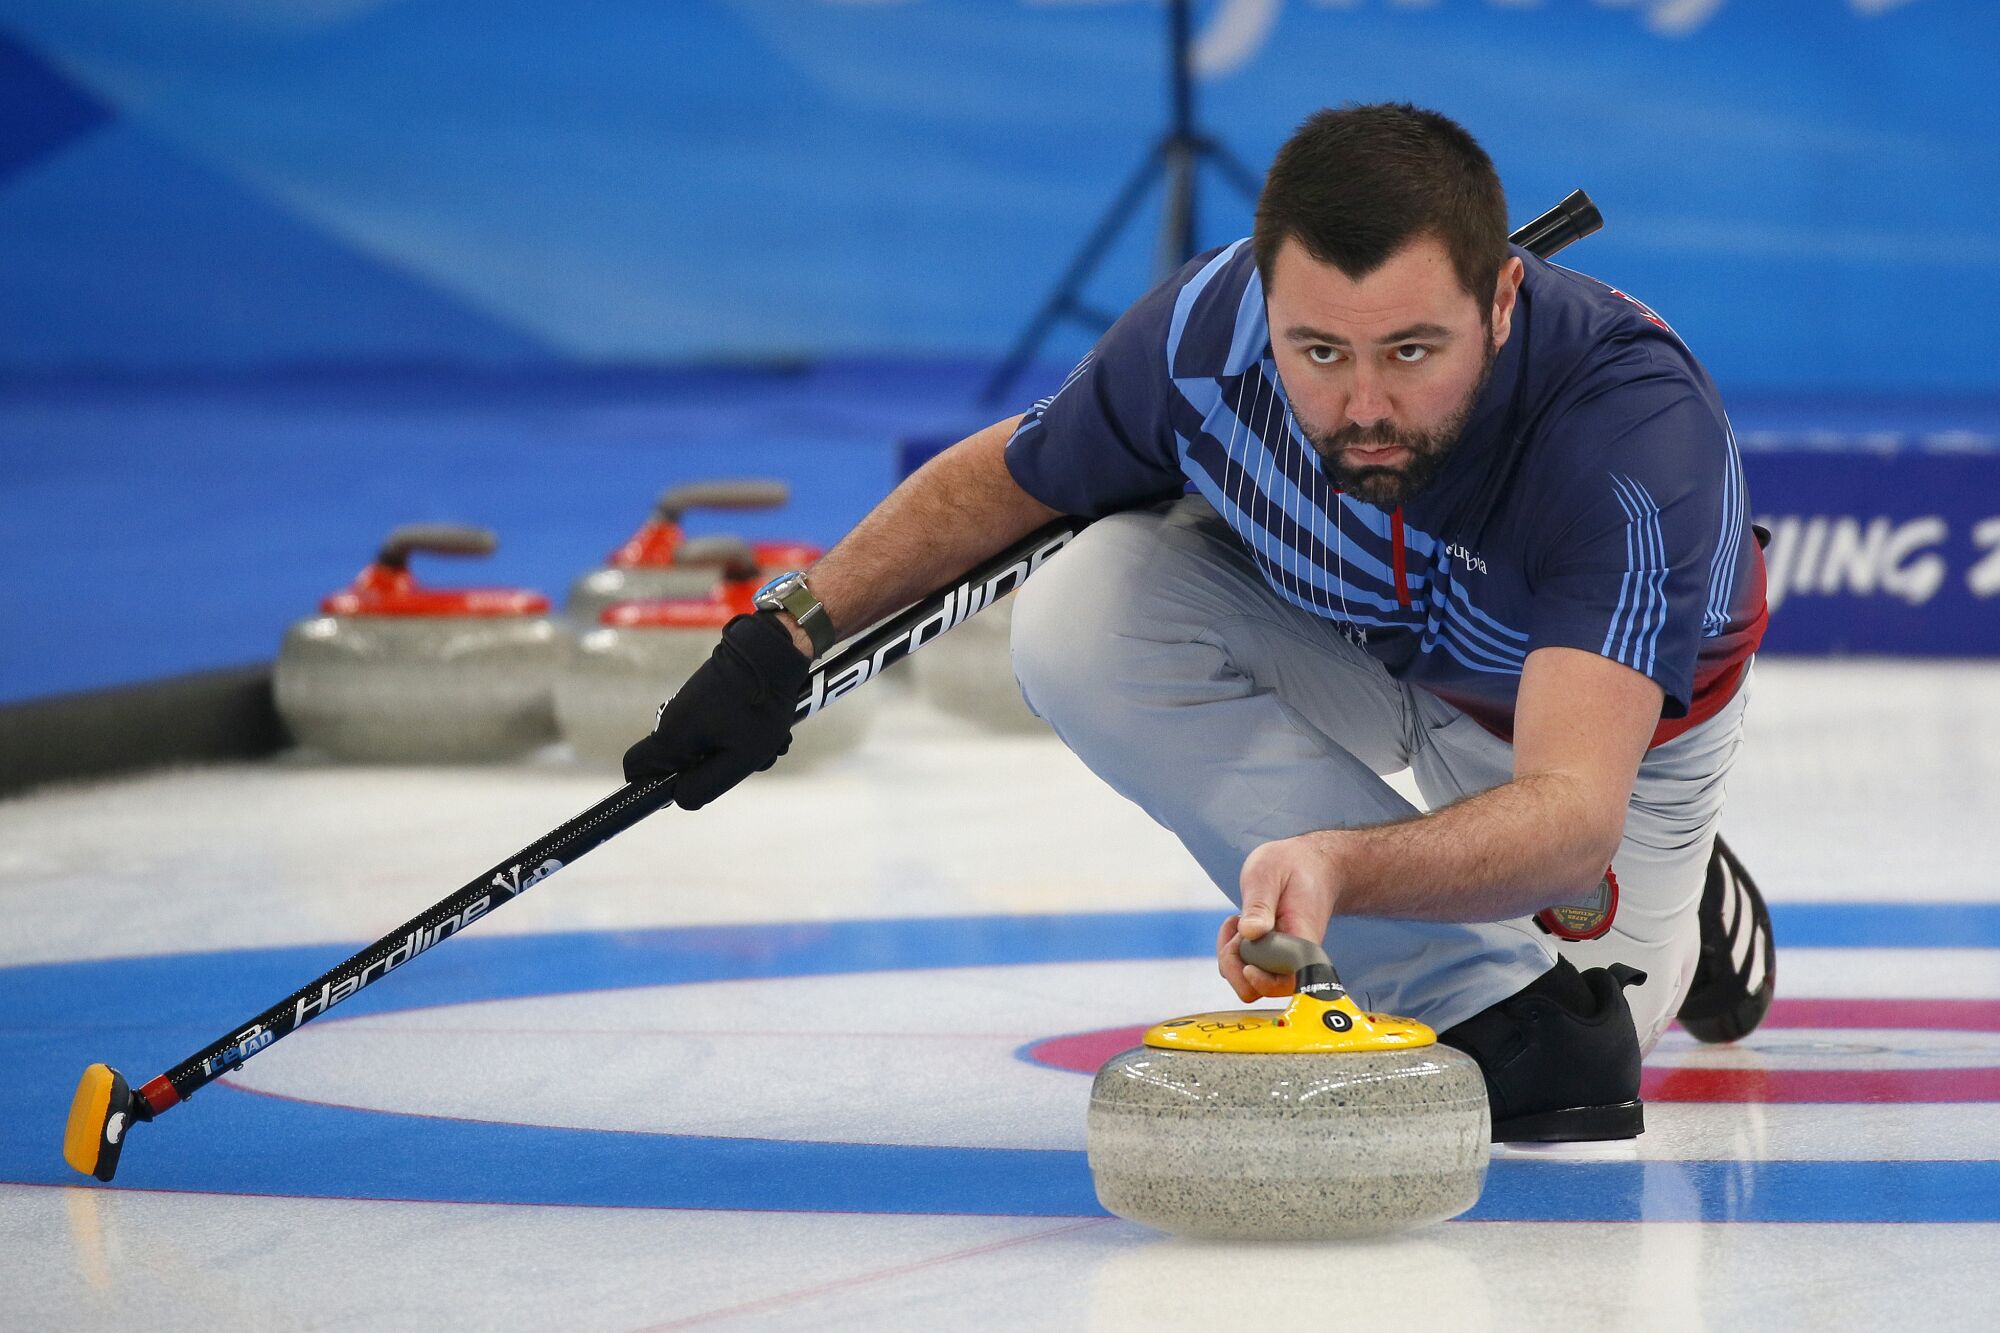 18 Facts About Curling